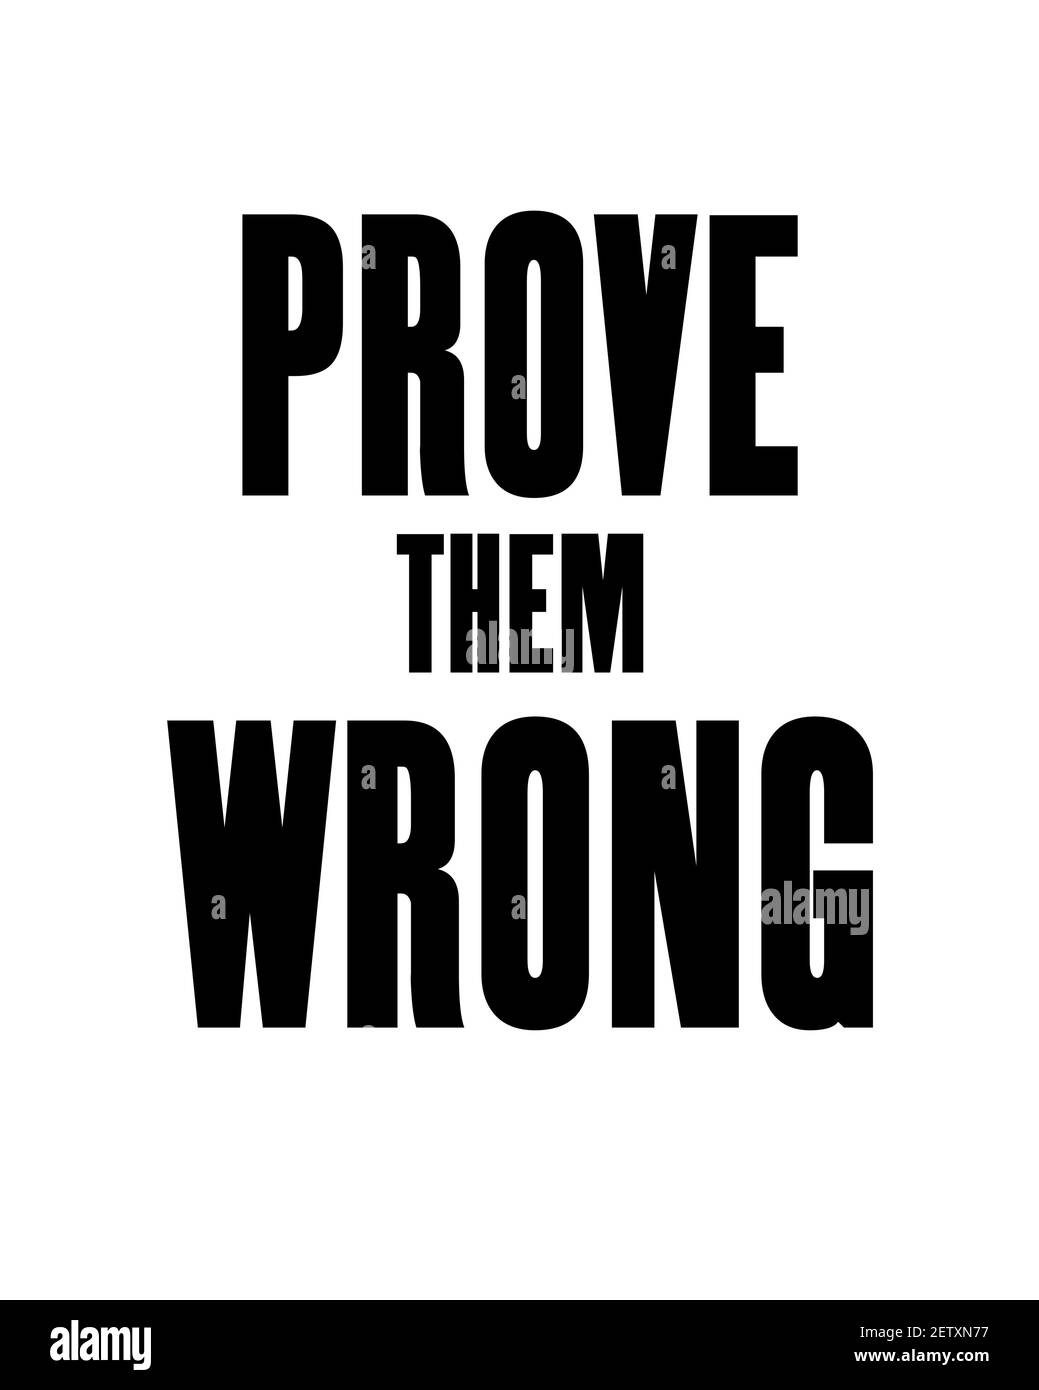 Prove Them Wrong Motivational Quotes Grunge Stock Vector Royalty Free  1533349949  Shutterstock